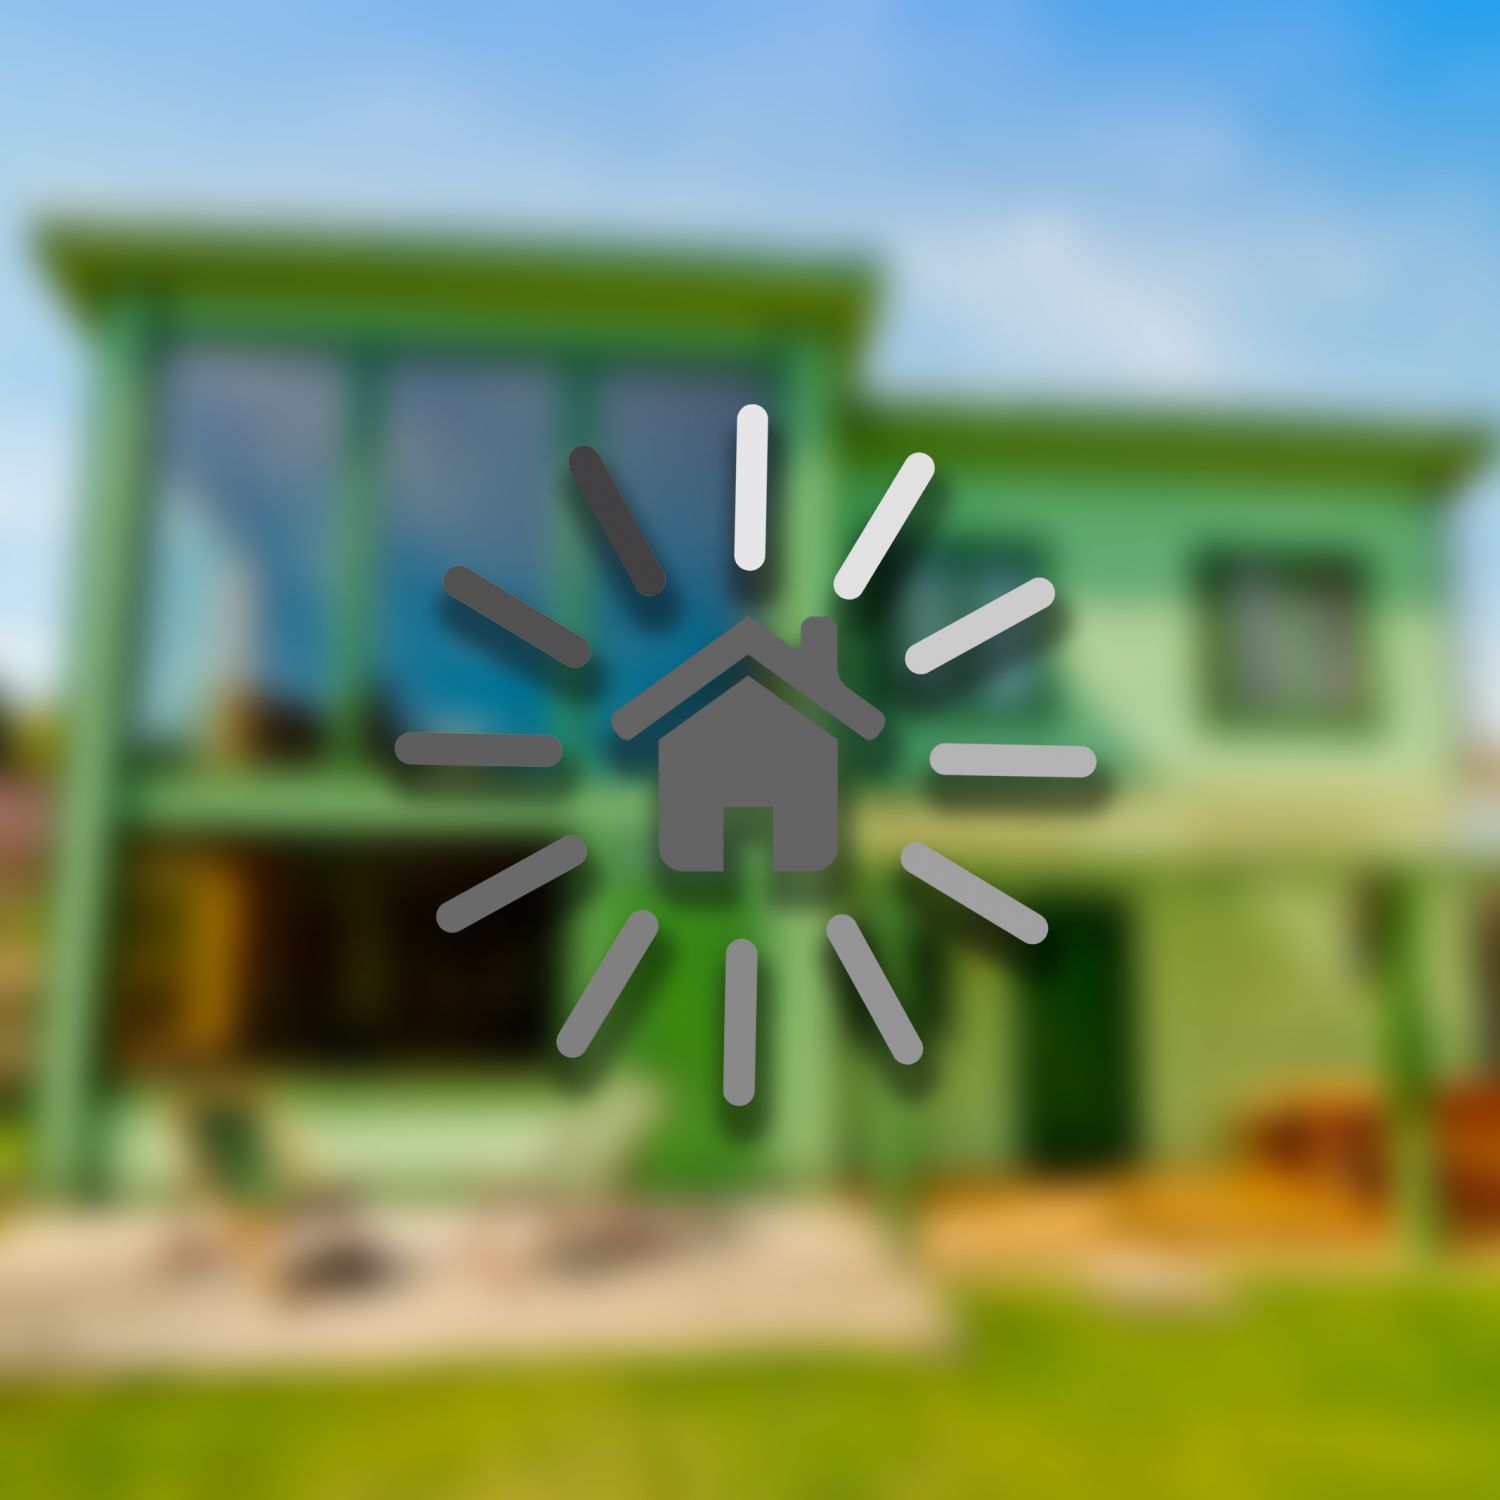 Loading bar circling around house against blurred out home